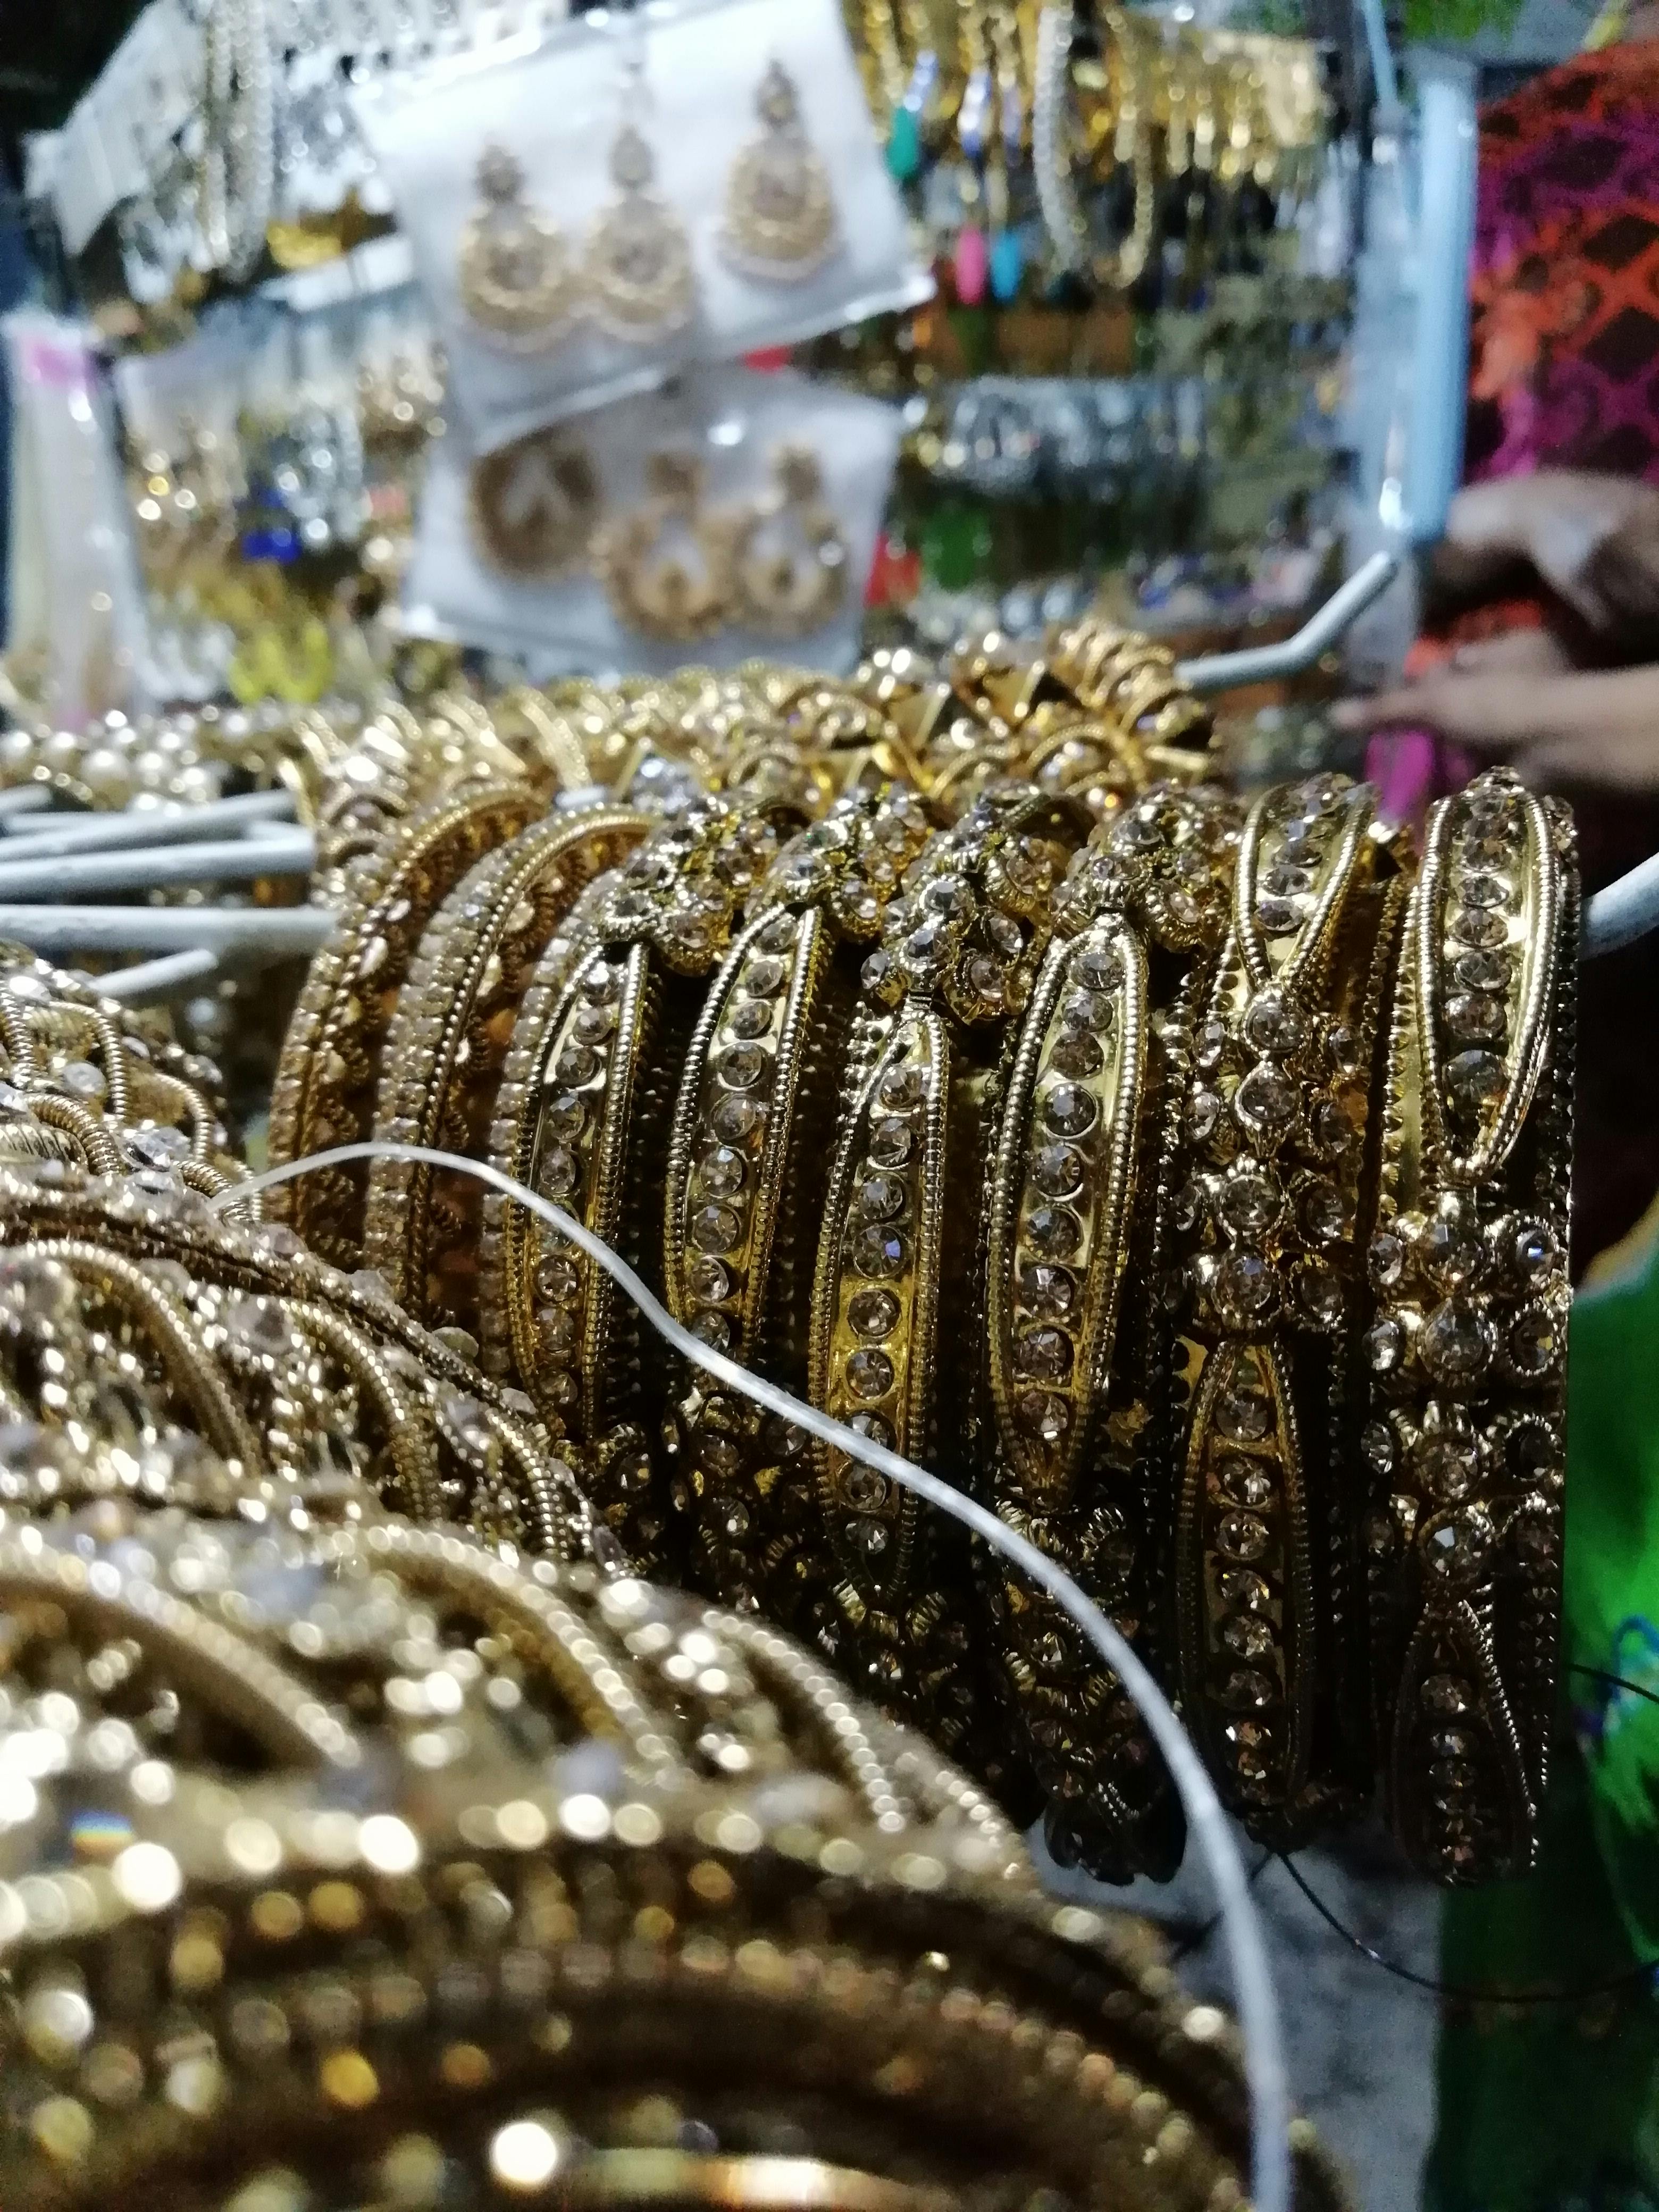 Free stock photo of #bangles #gold#golden#women\'s#choice #India #clear, #indianmarket #honor #photography